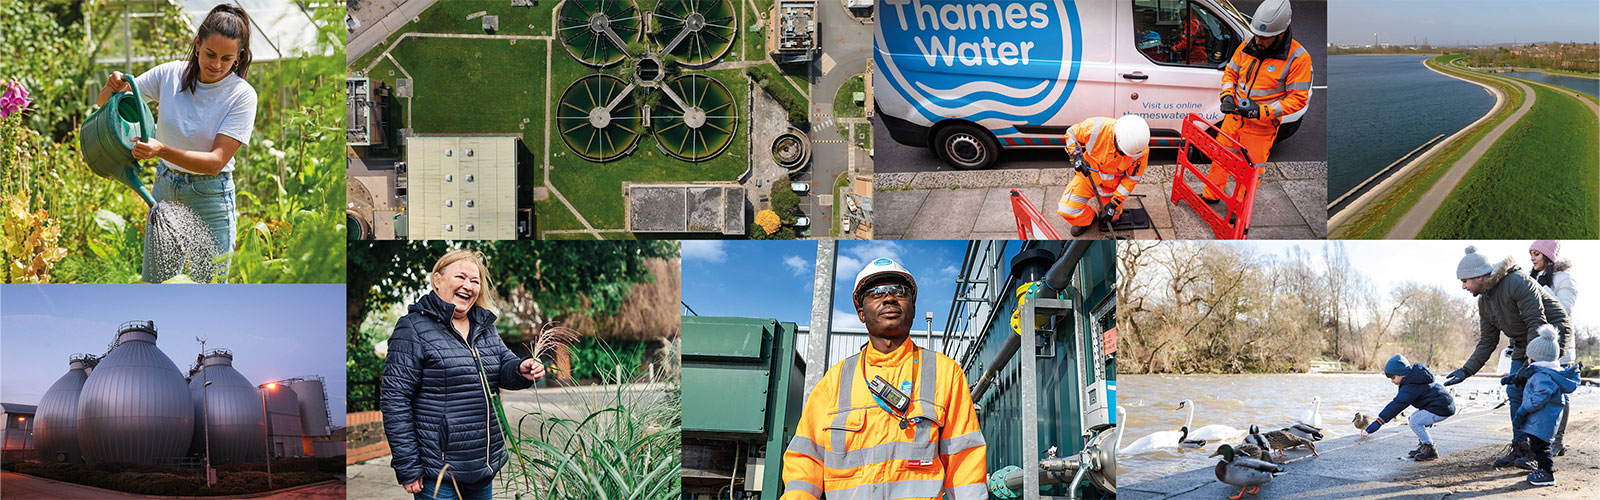 A montage banner of images of Thames customers and workers